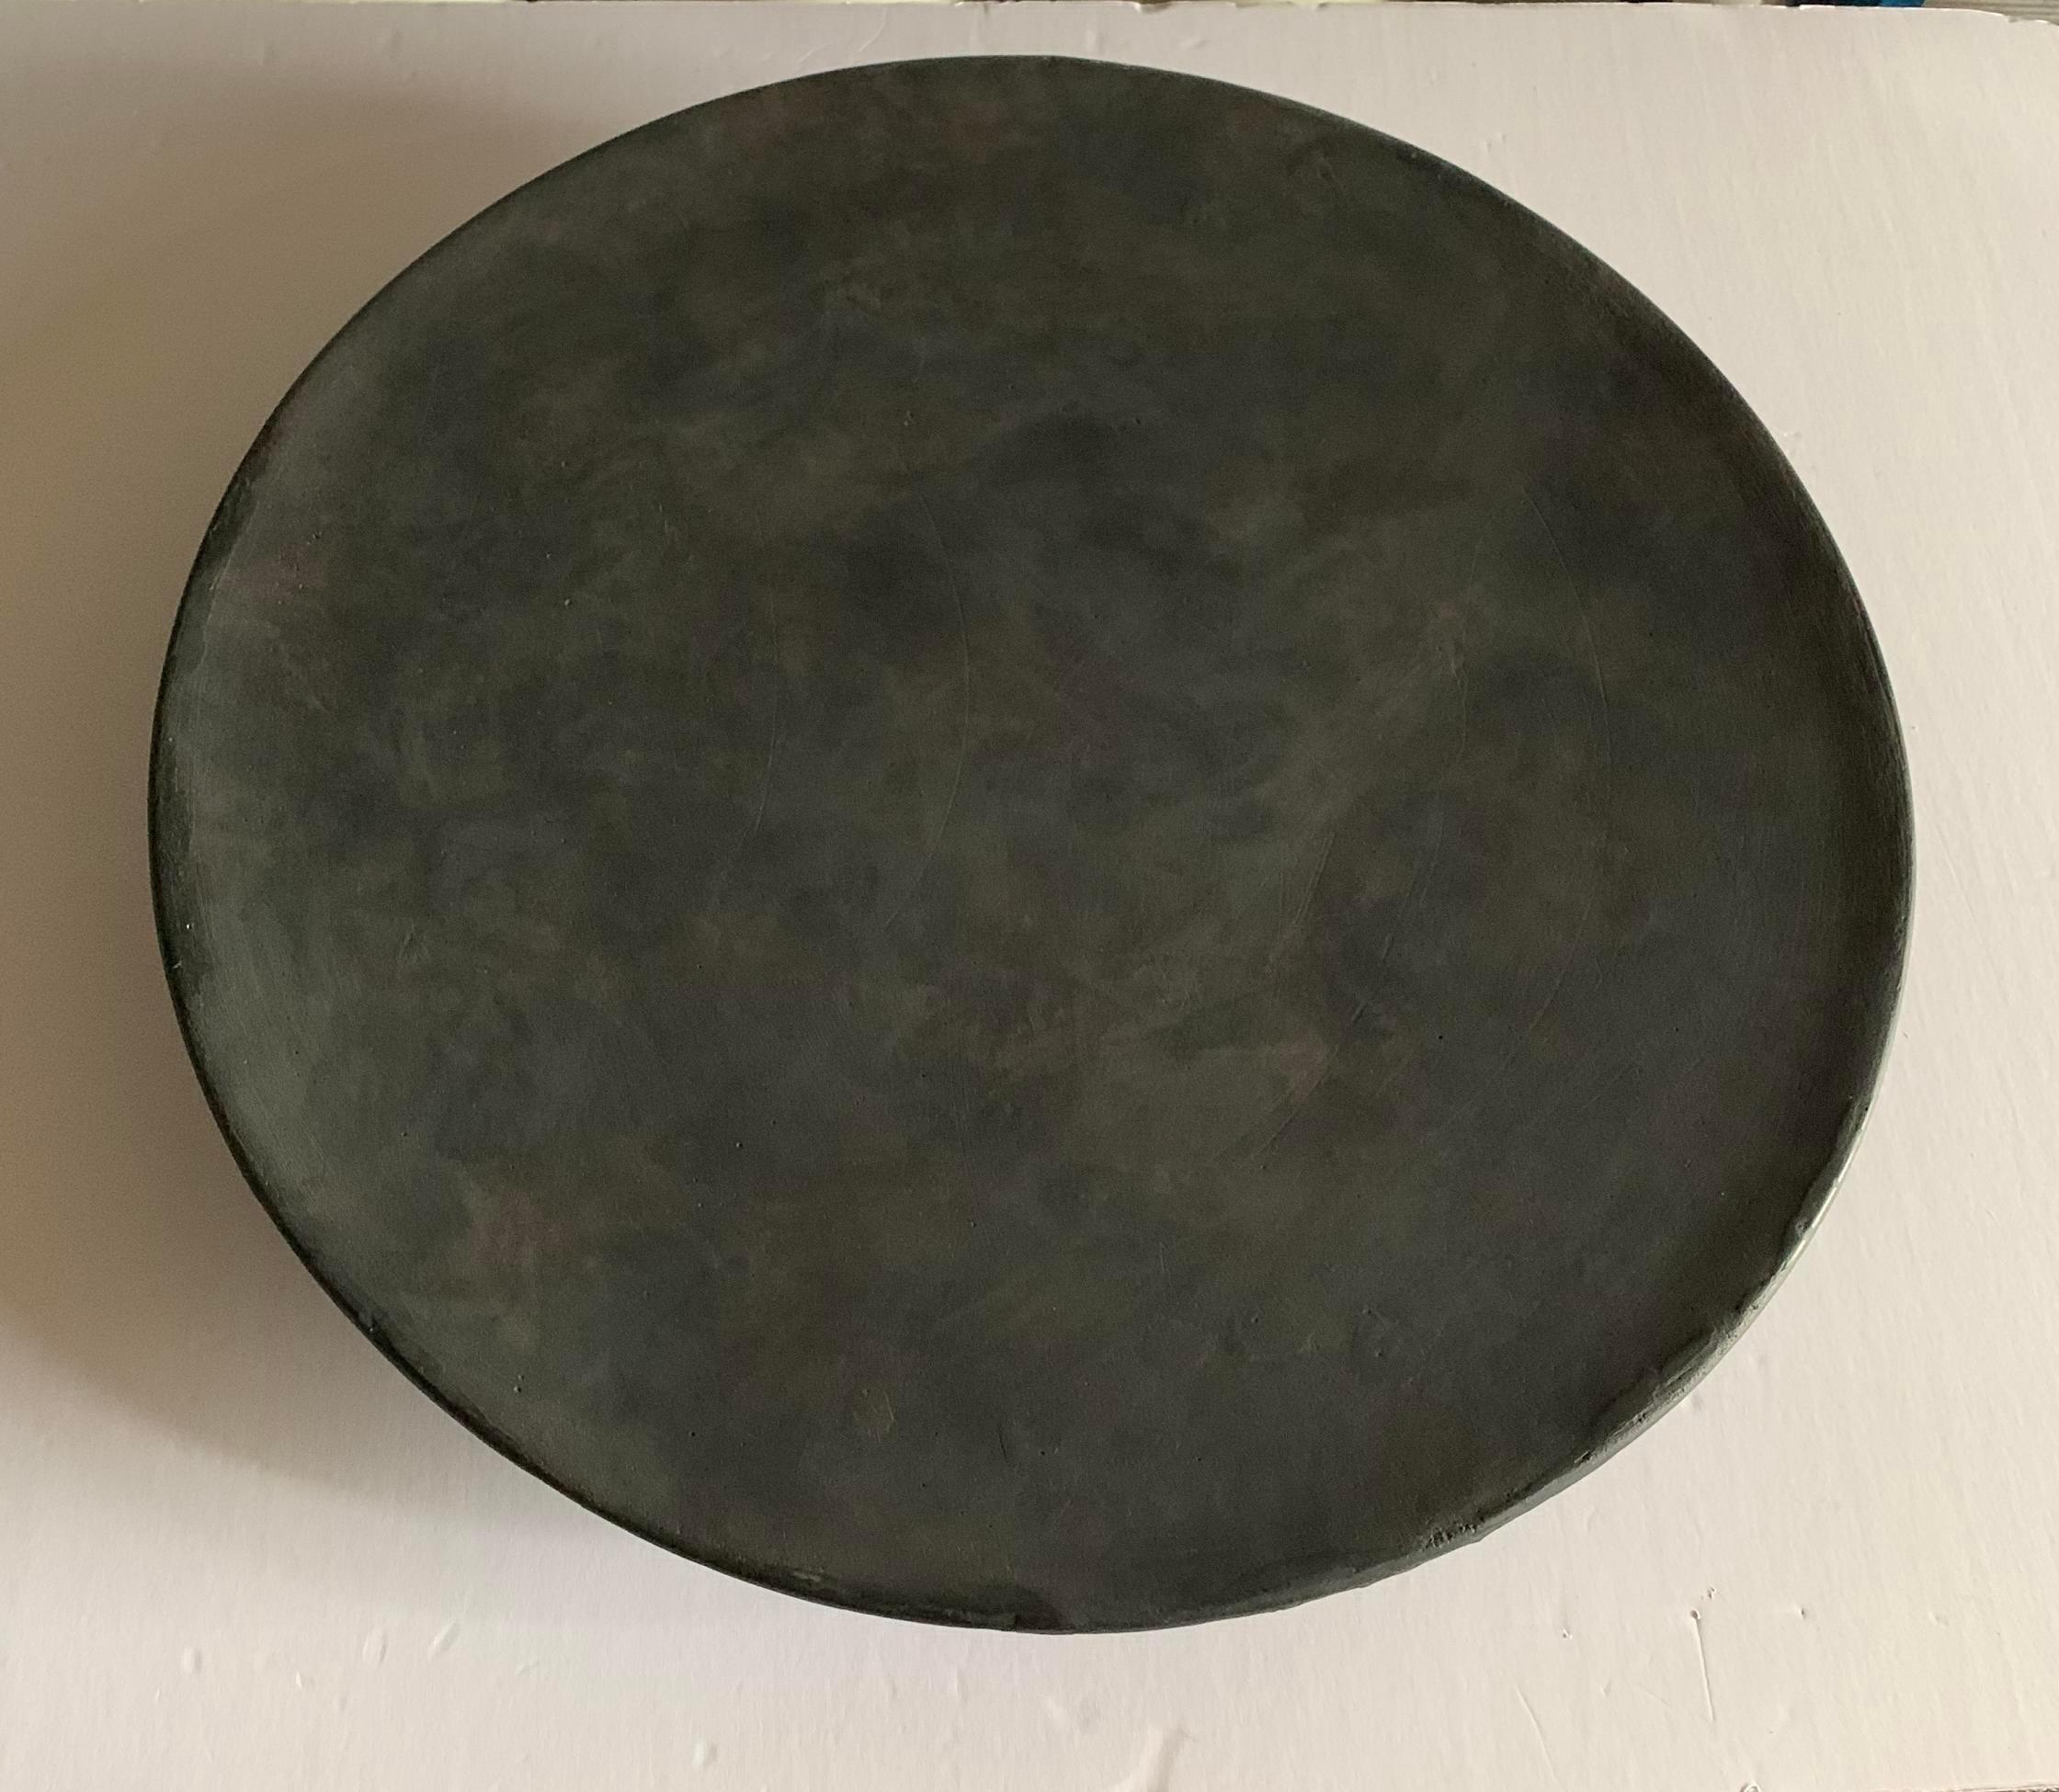 Contemporary Danish design large round platter.
Sits on three legs.
Matte dark grey glaze.
One of a collection of many shapes and sizes.